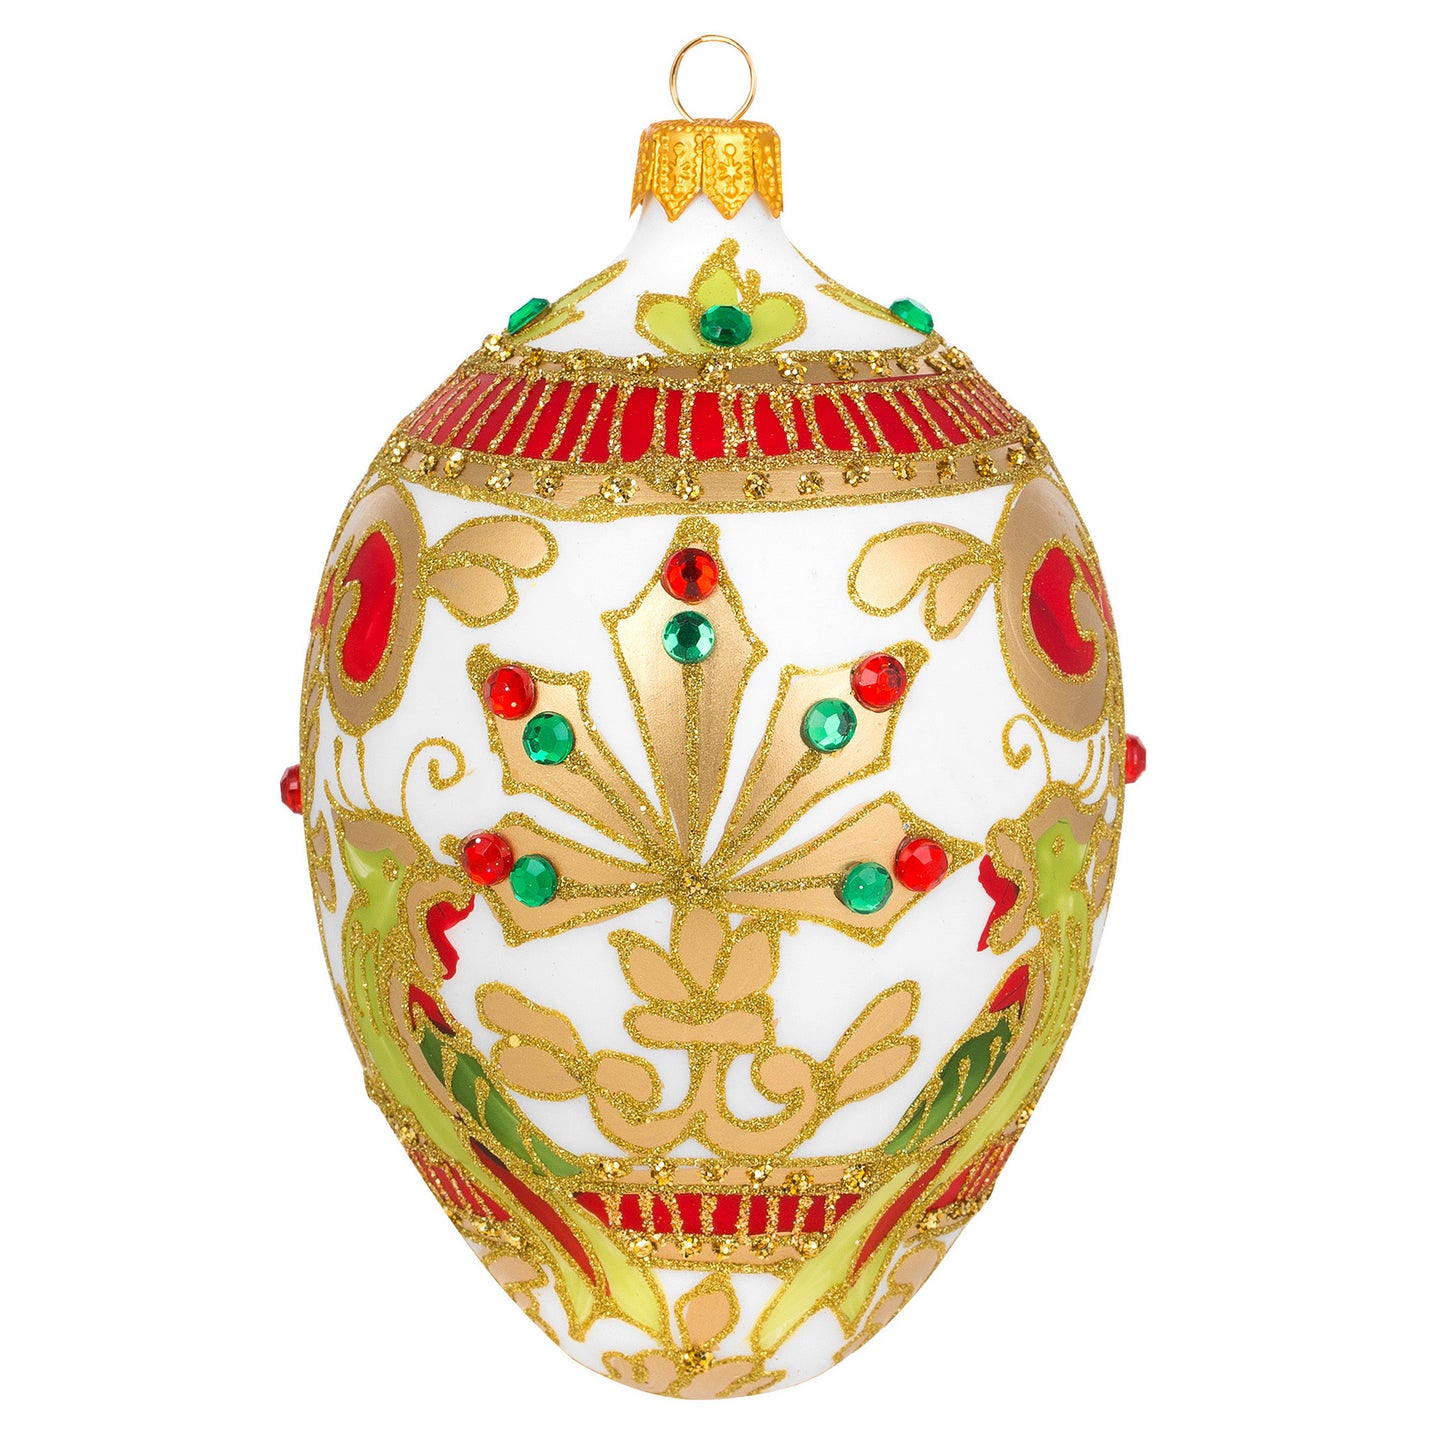 FABERGÉ EGG WITH EXOTIC PATTERN